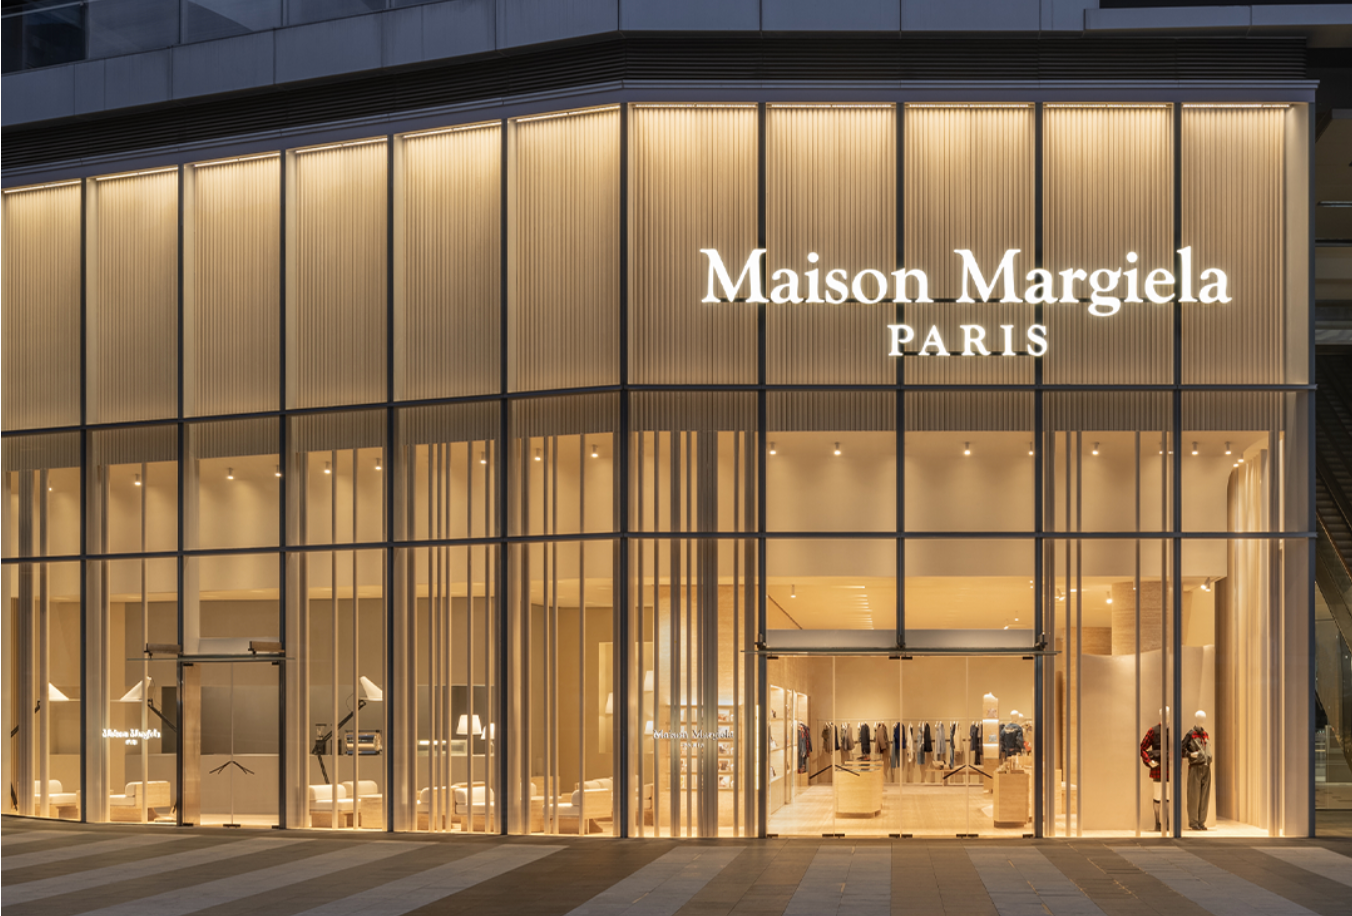 Experience comes first in China: Maison Margiela's latest concept